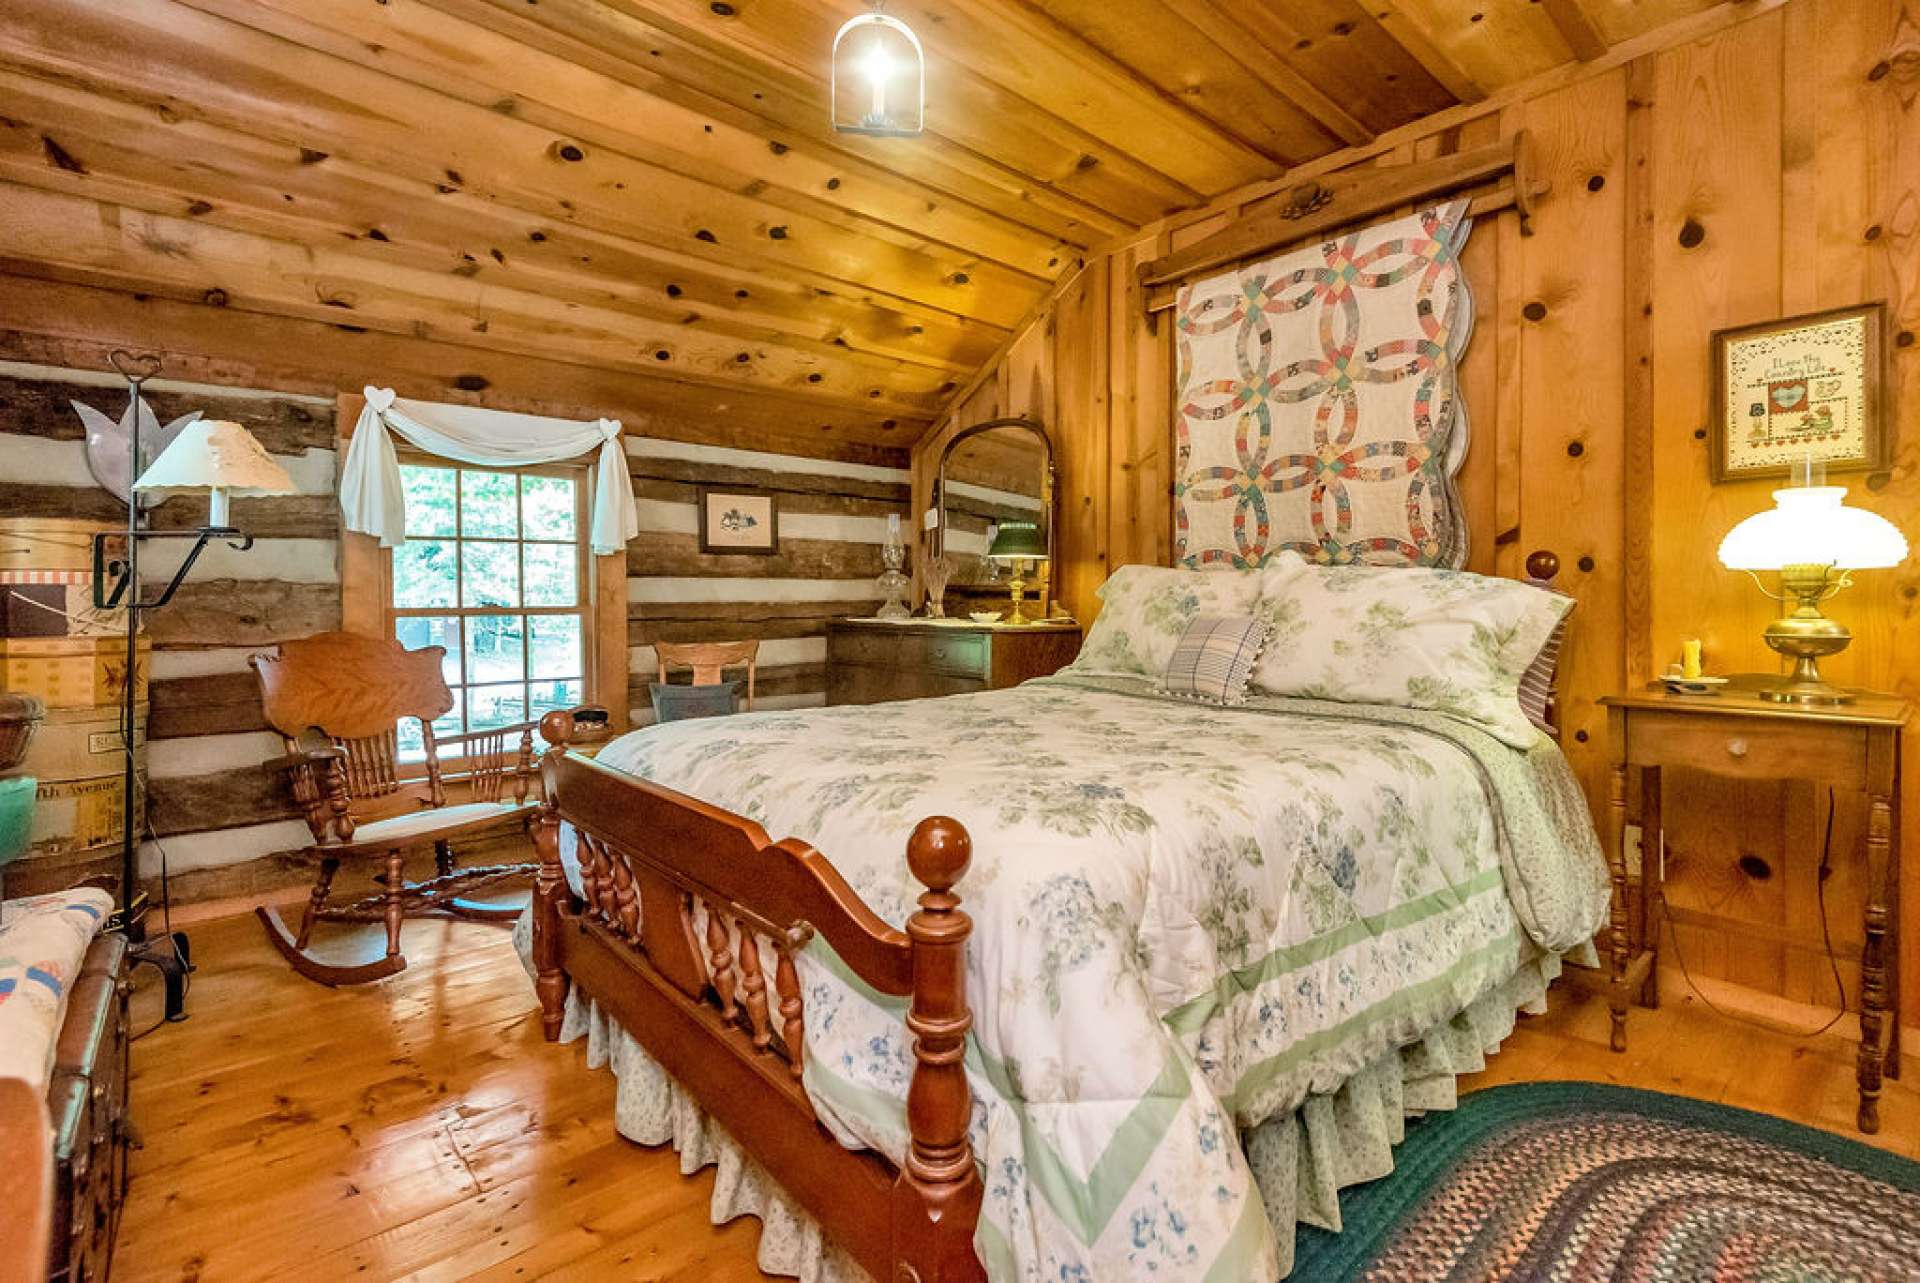 Guest bedroom on the upper level will charm all your guests.